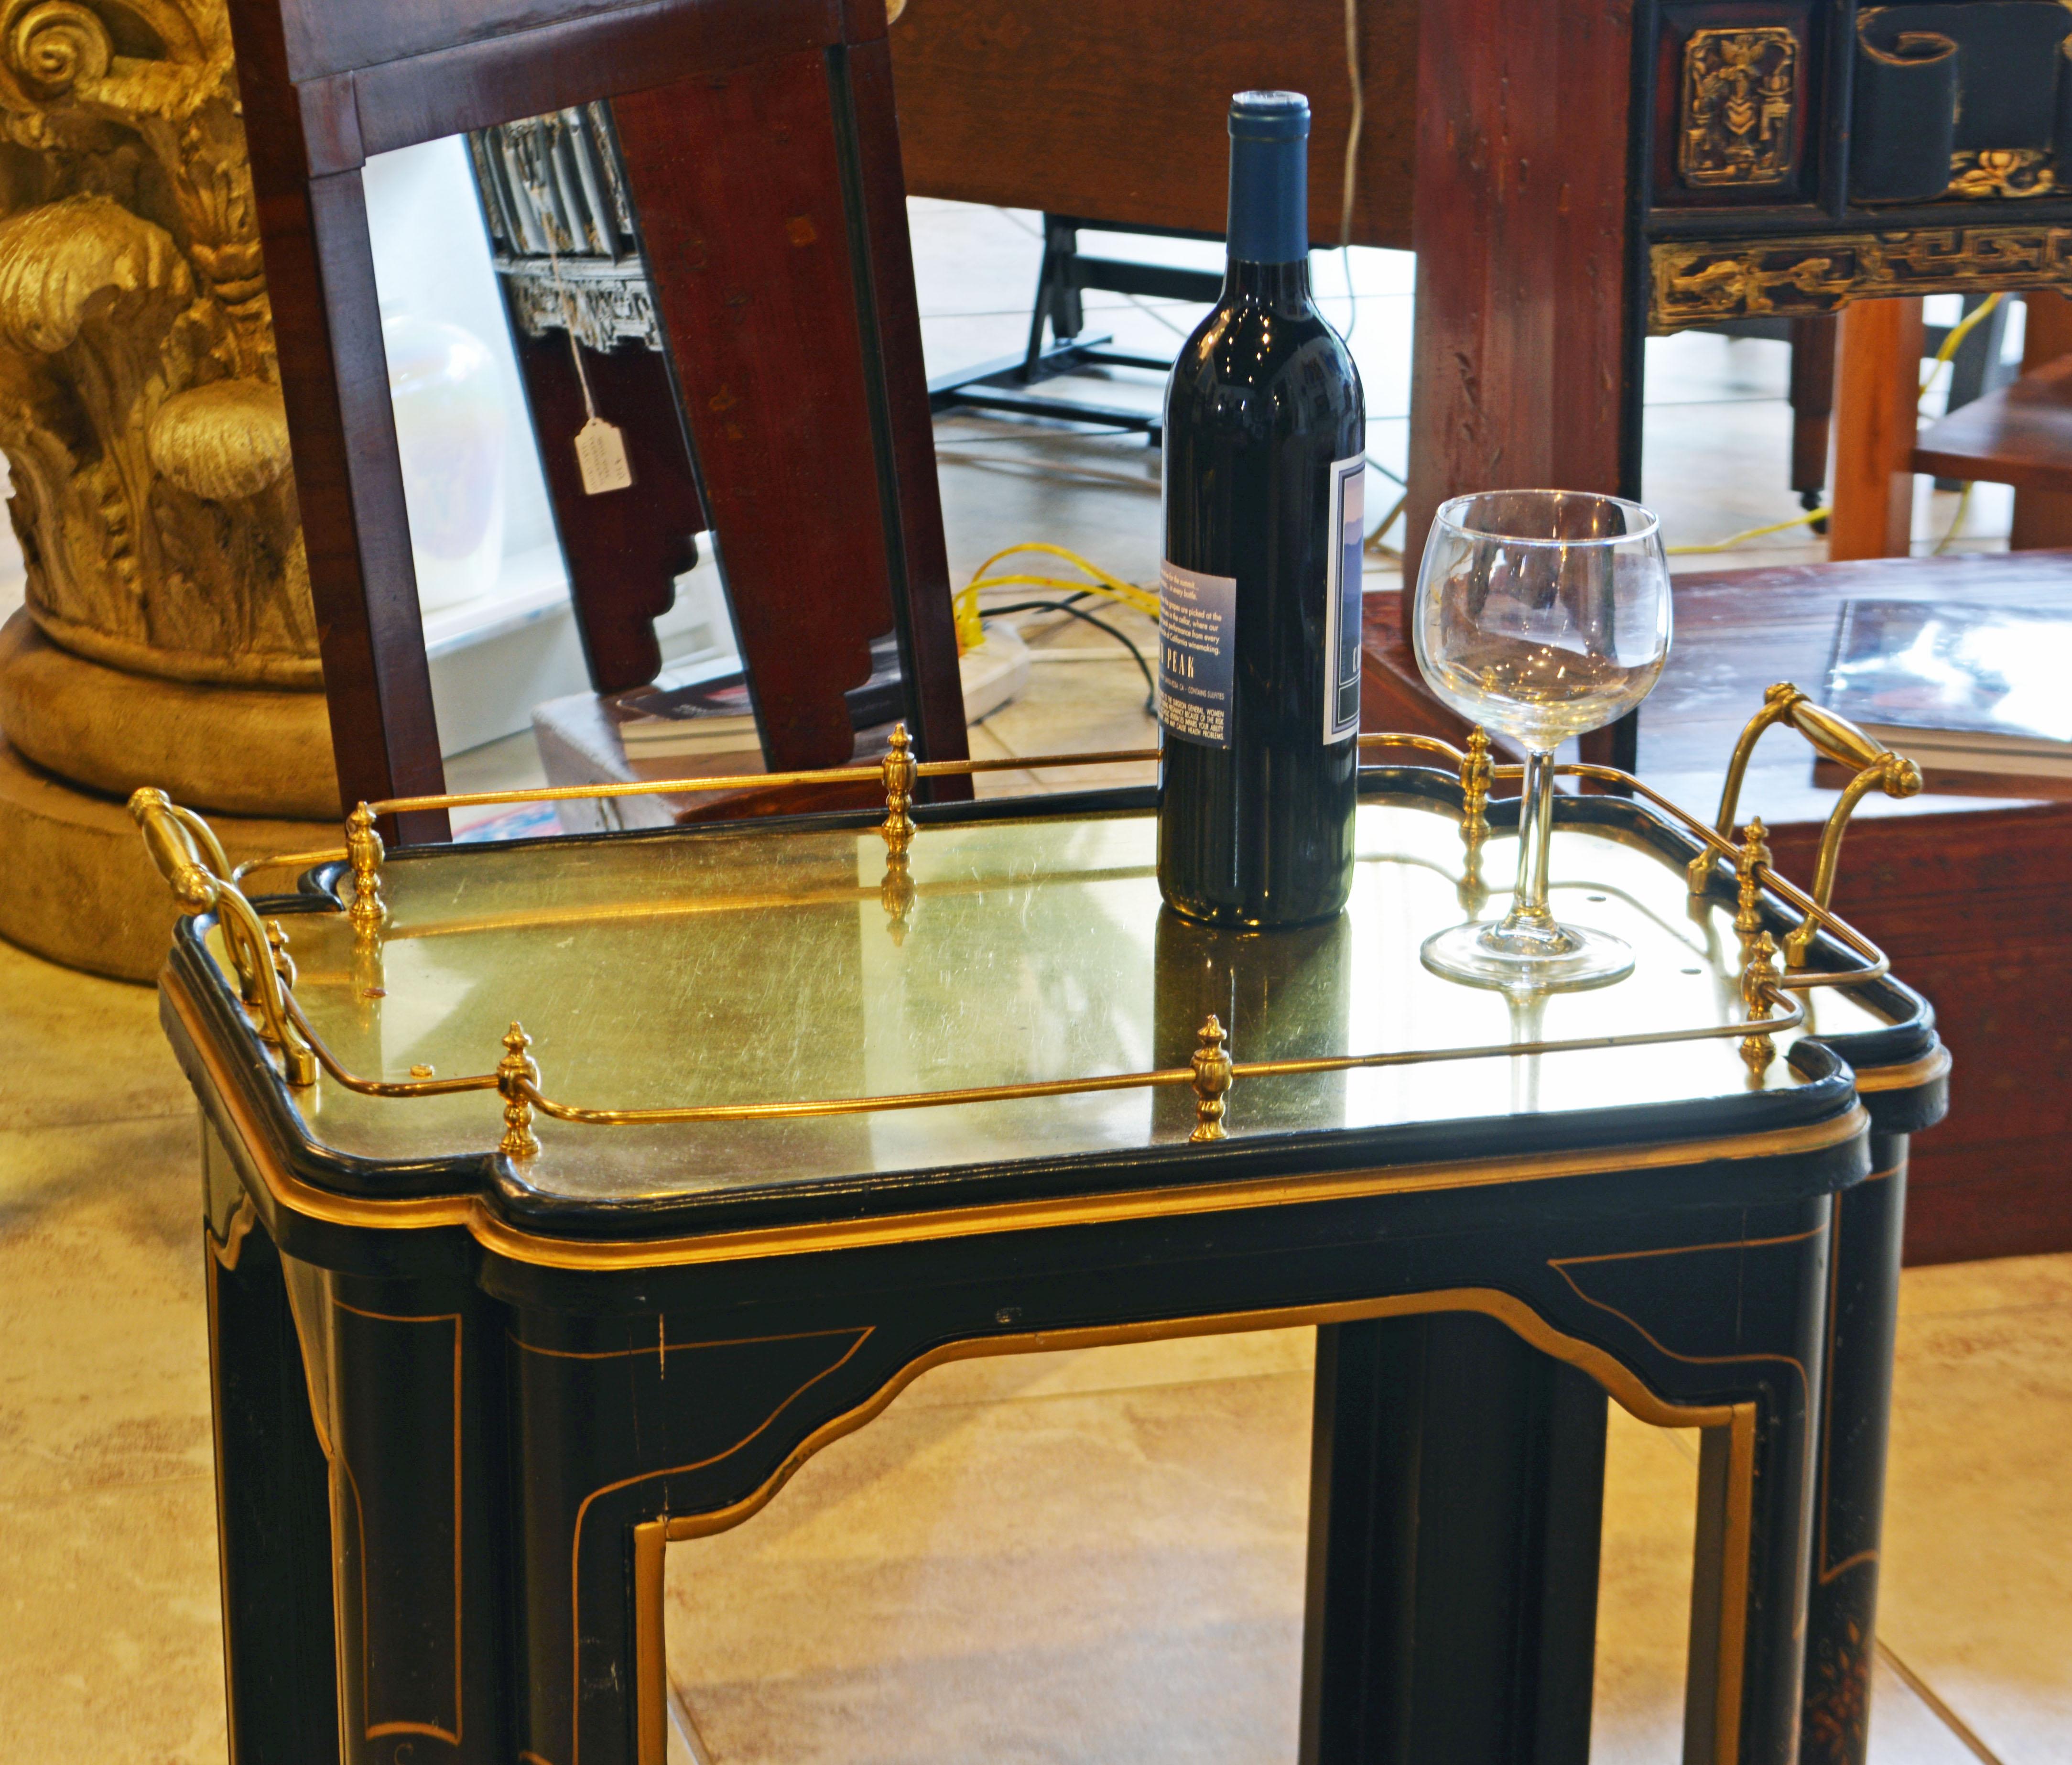 This elegant scaloped design accent table features a top in the shape of a solid brass tray with handles and gallery attached to a black and gllt lacquerred frame in the chinoiserie chippendale style. Note the floral decorated double legs.